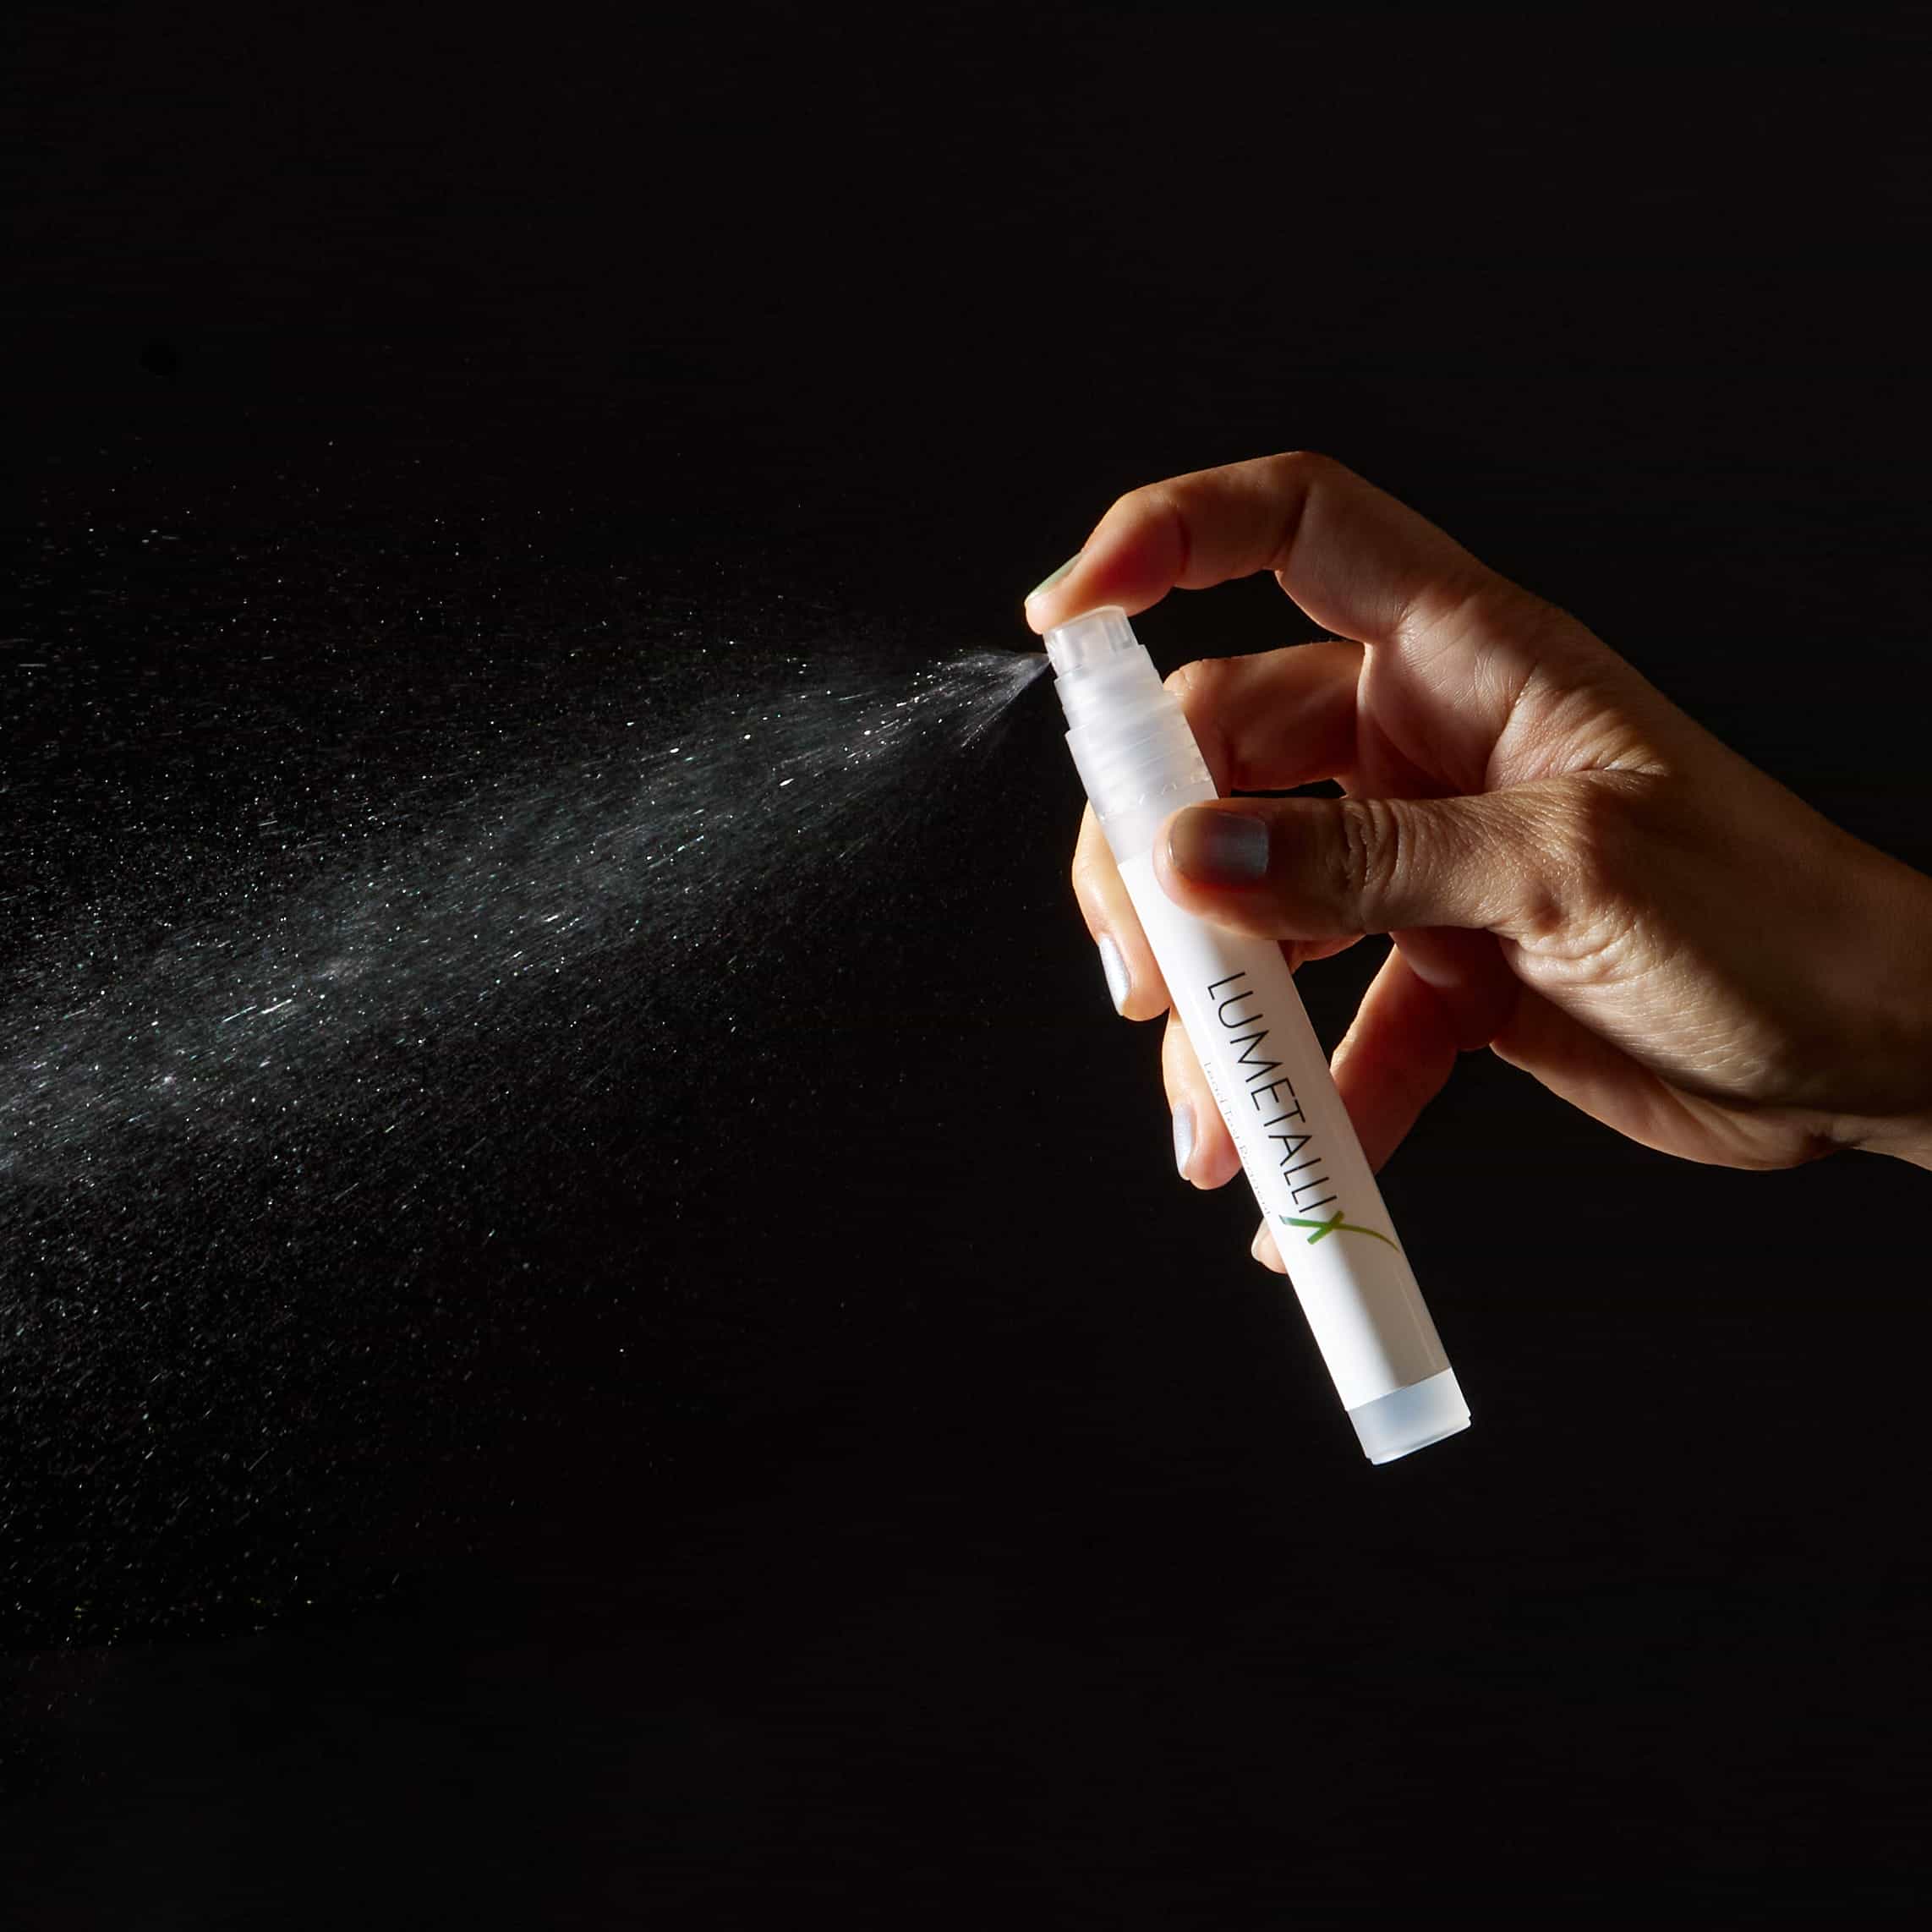 A Reagent spray bottle spraying from the right